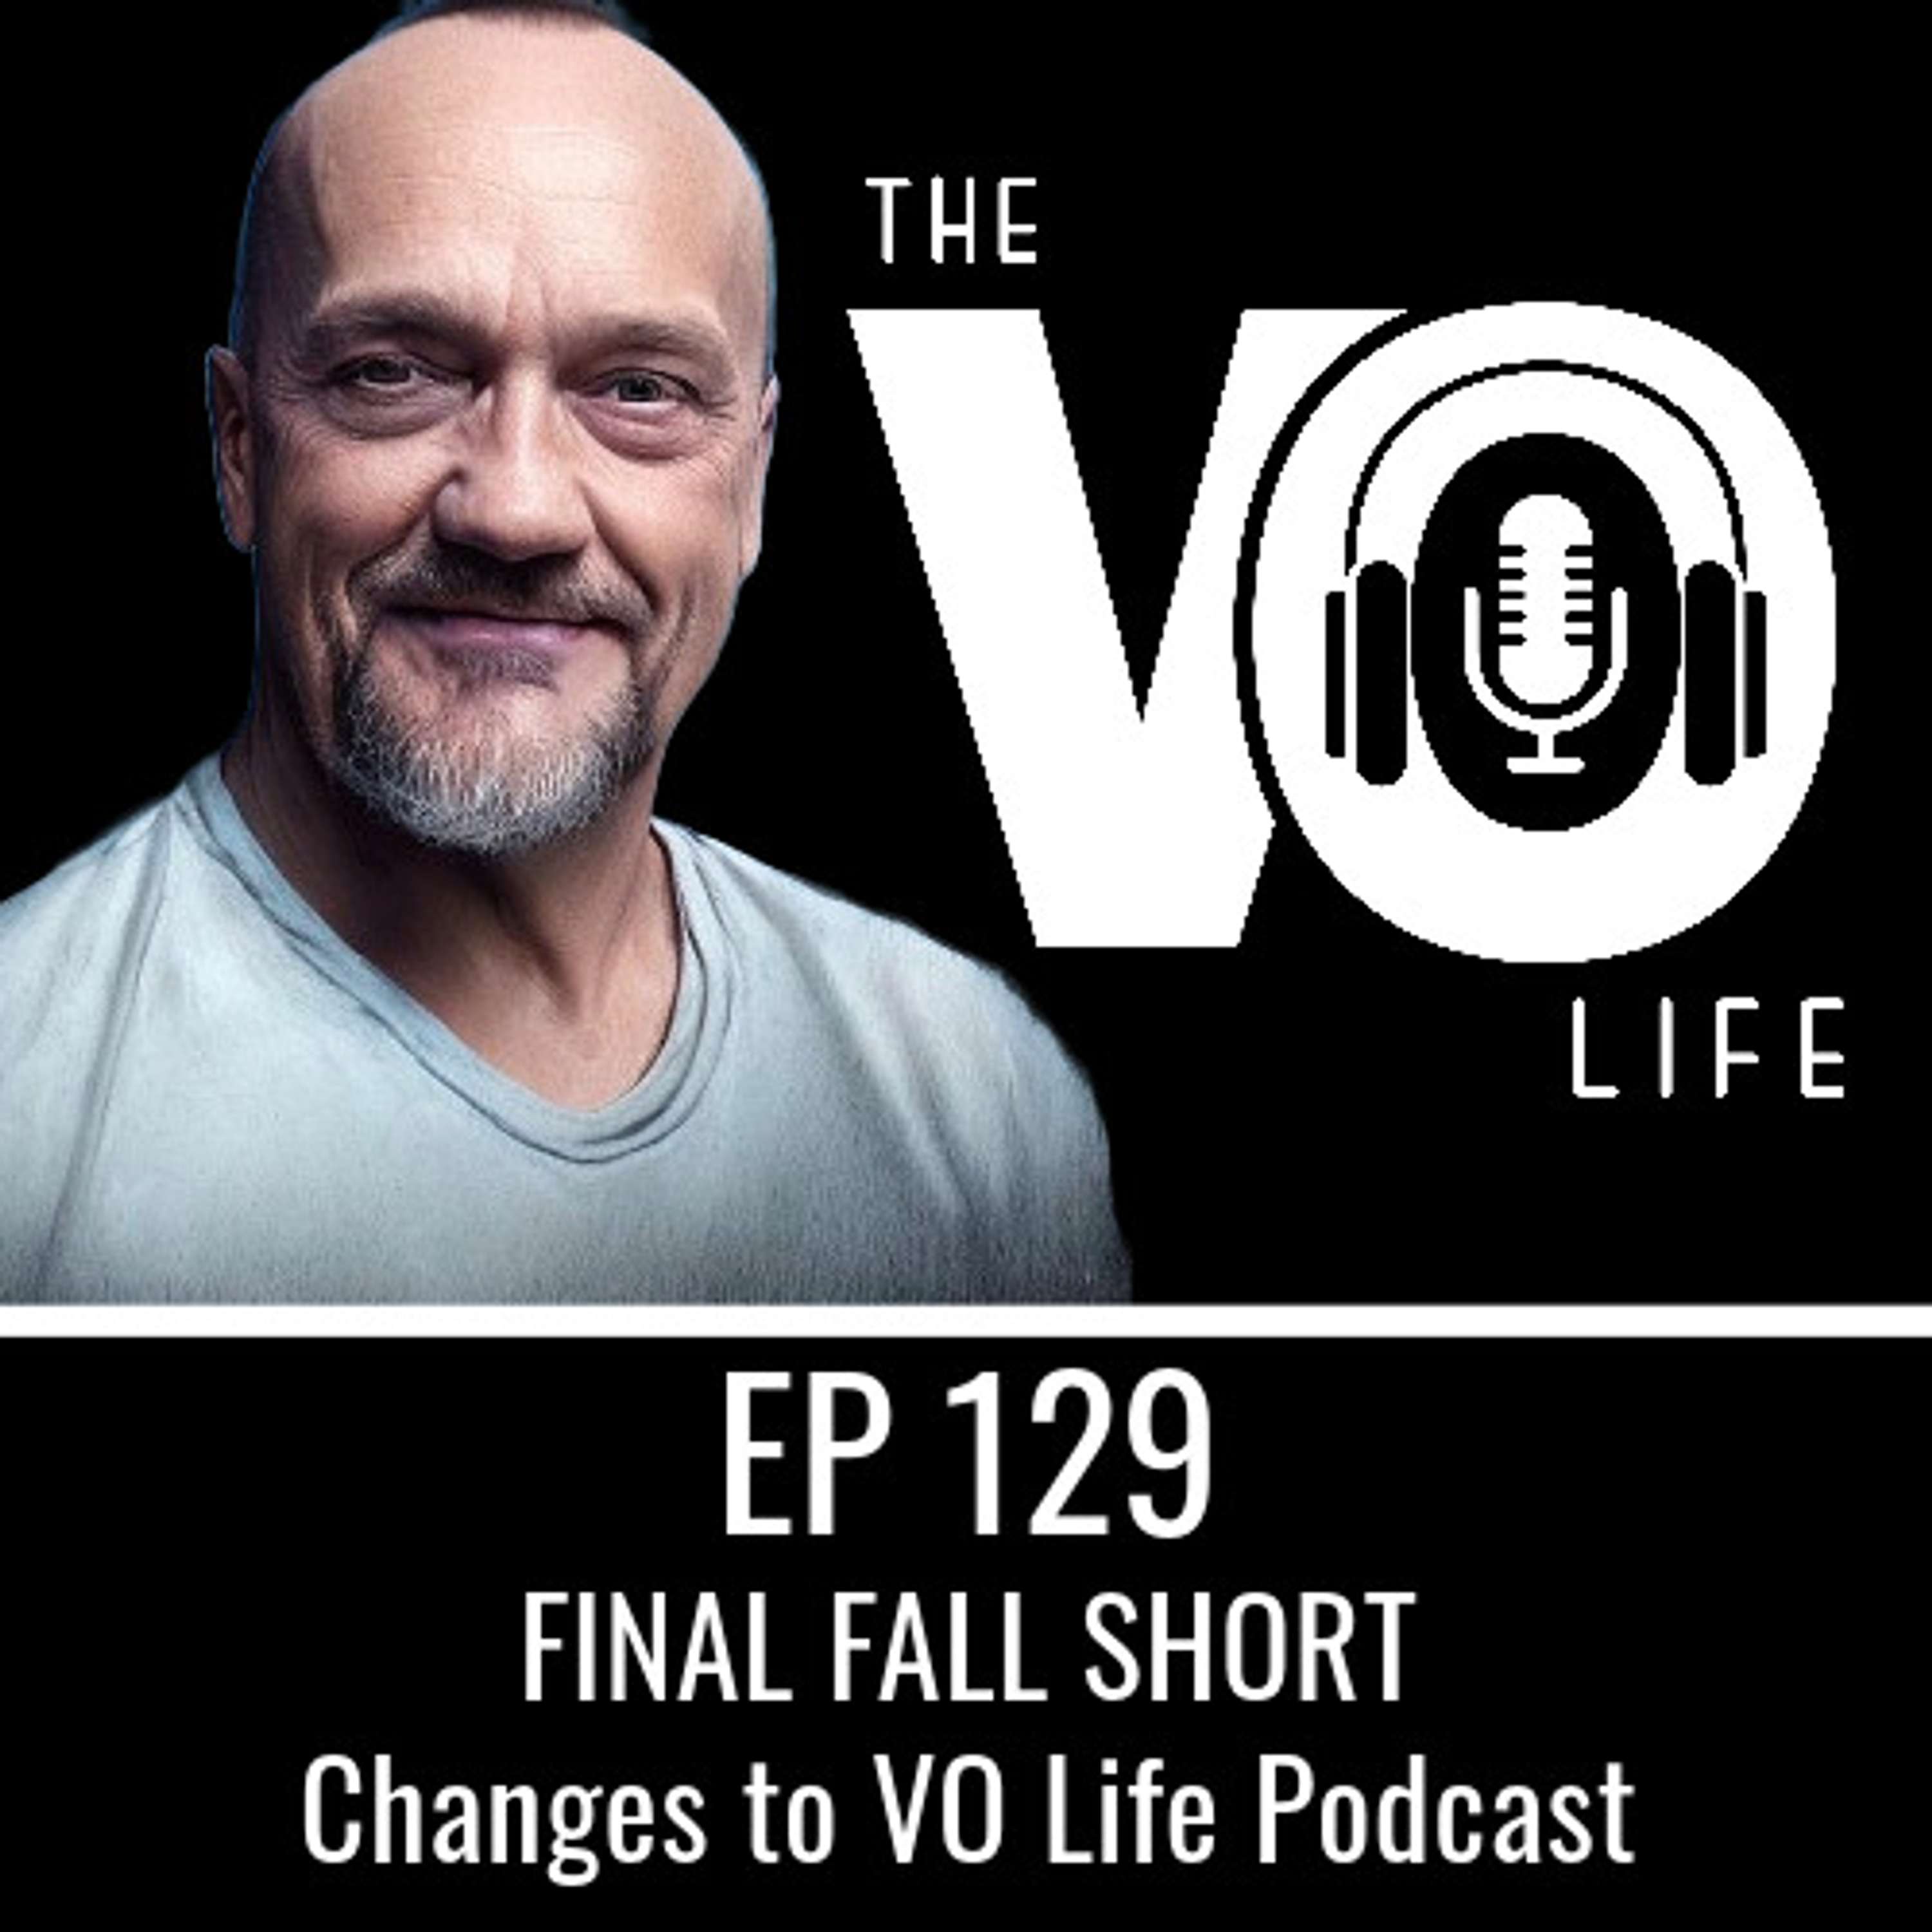 Ep 129 - Final FALL SHORT - Changes to the Podcast